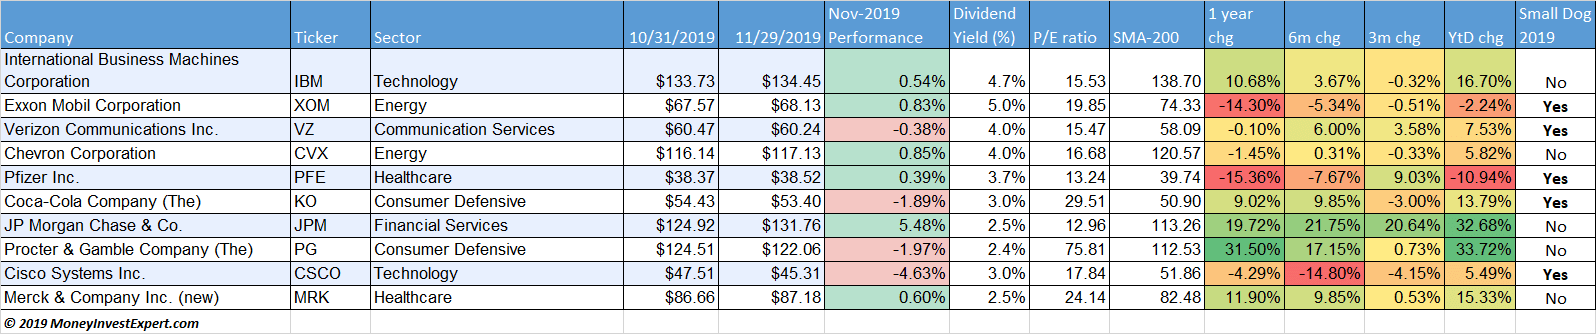 dogs-of-the-dow-november-2019